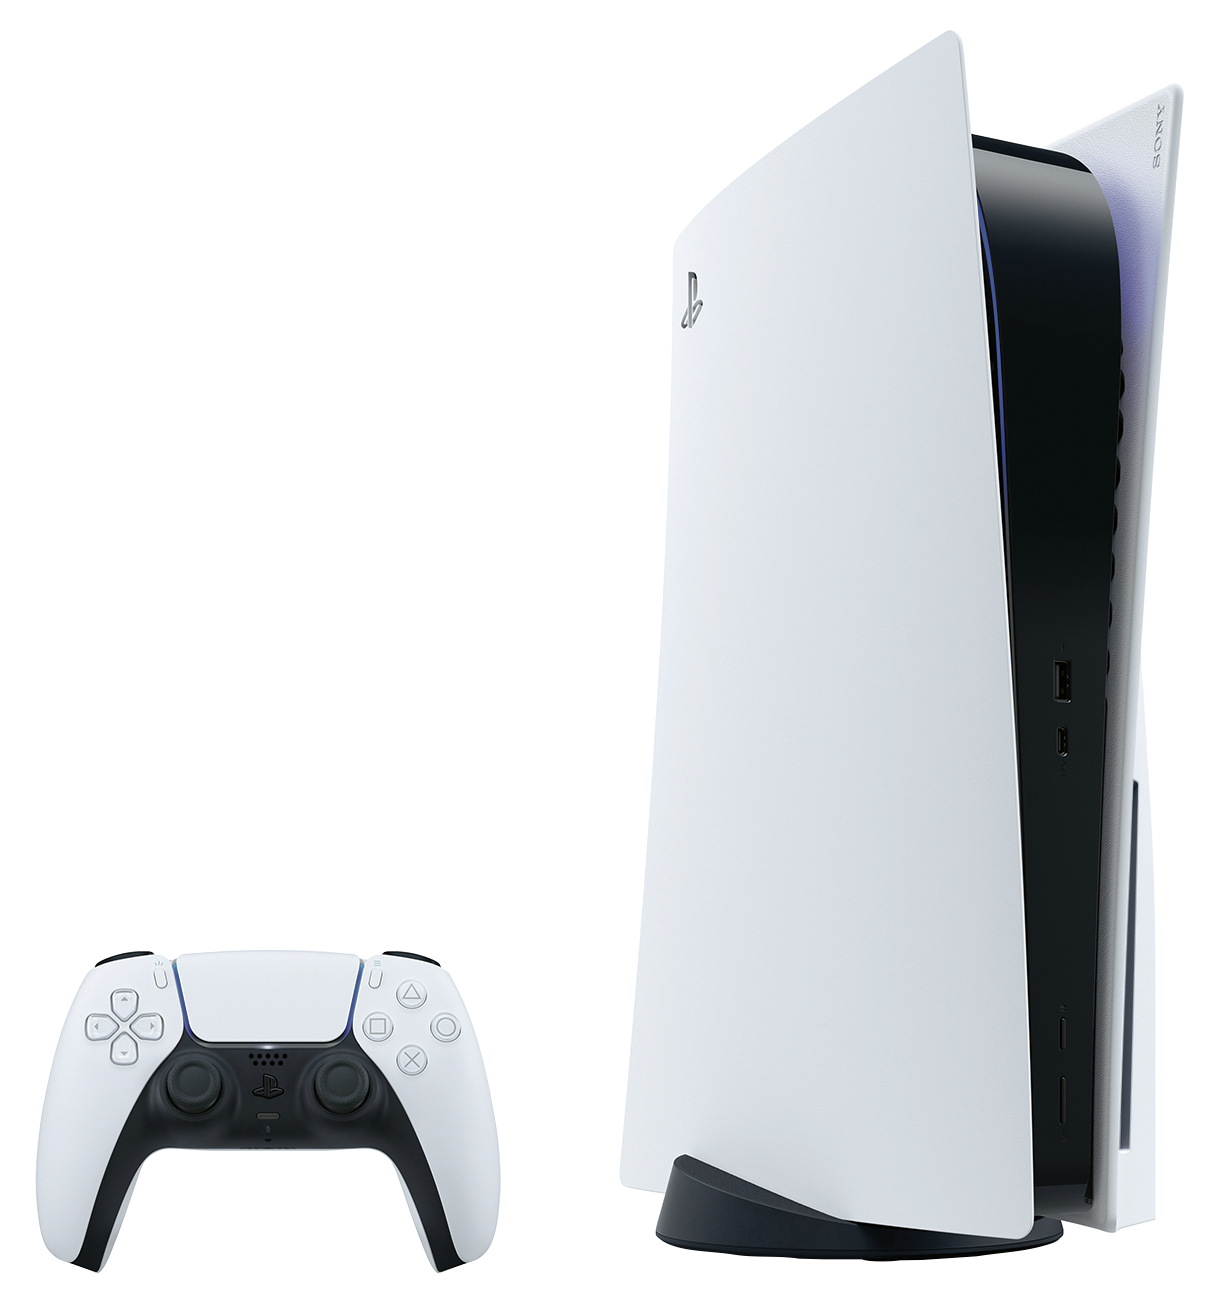  Sony PlayStation 5 tower and controller in white